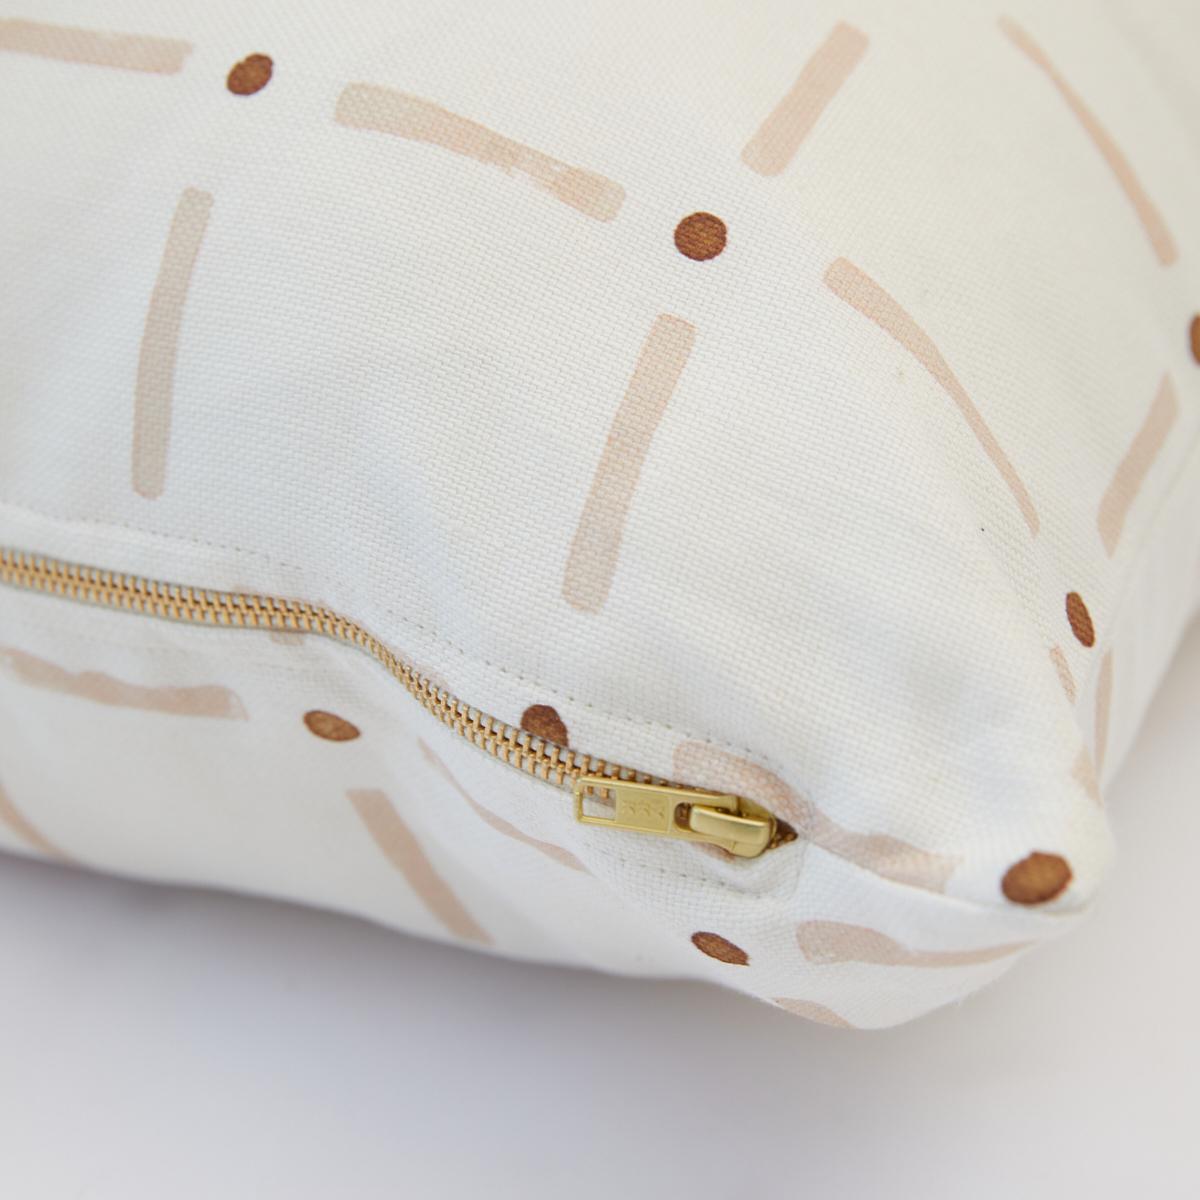 This pillow features Drifting Grid by Caroline Z Hurley with a knife edge finish. Our Drifting Grid pillow is a playful take on plaid – a perfect blend of tradition and whimsy. Our petal colorway marries a subtle blush with accents earthy